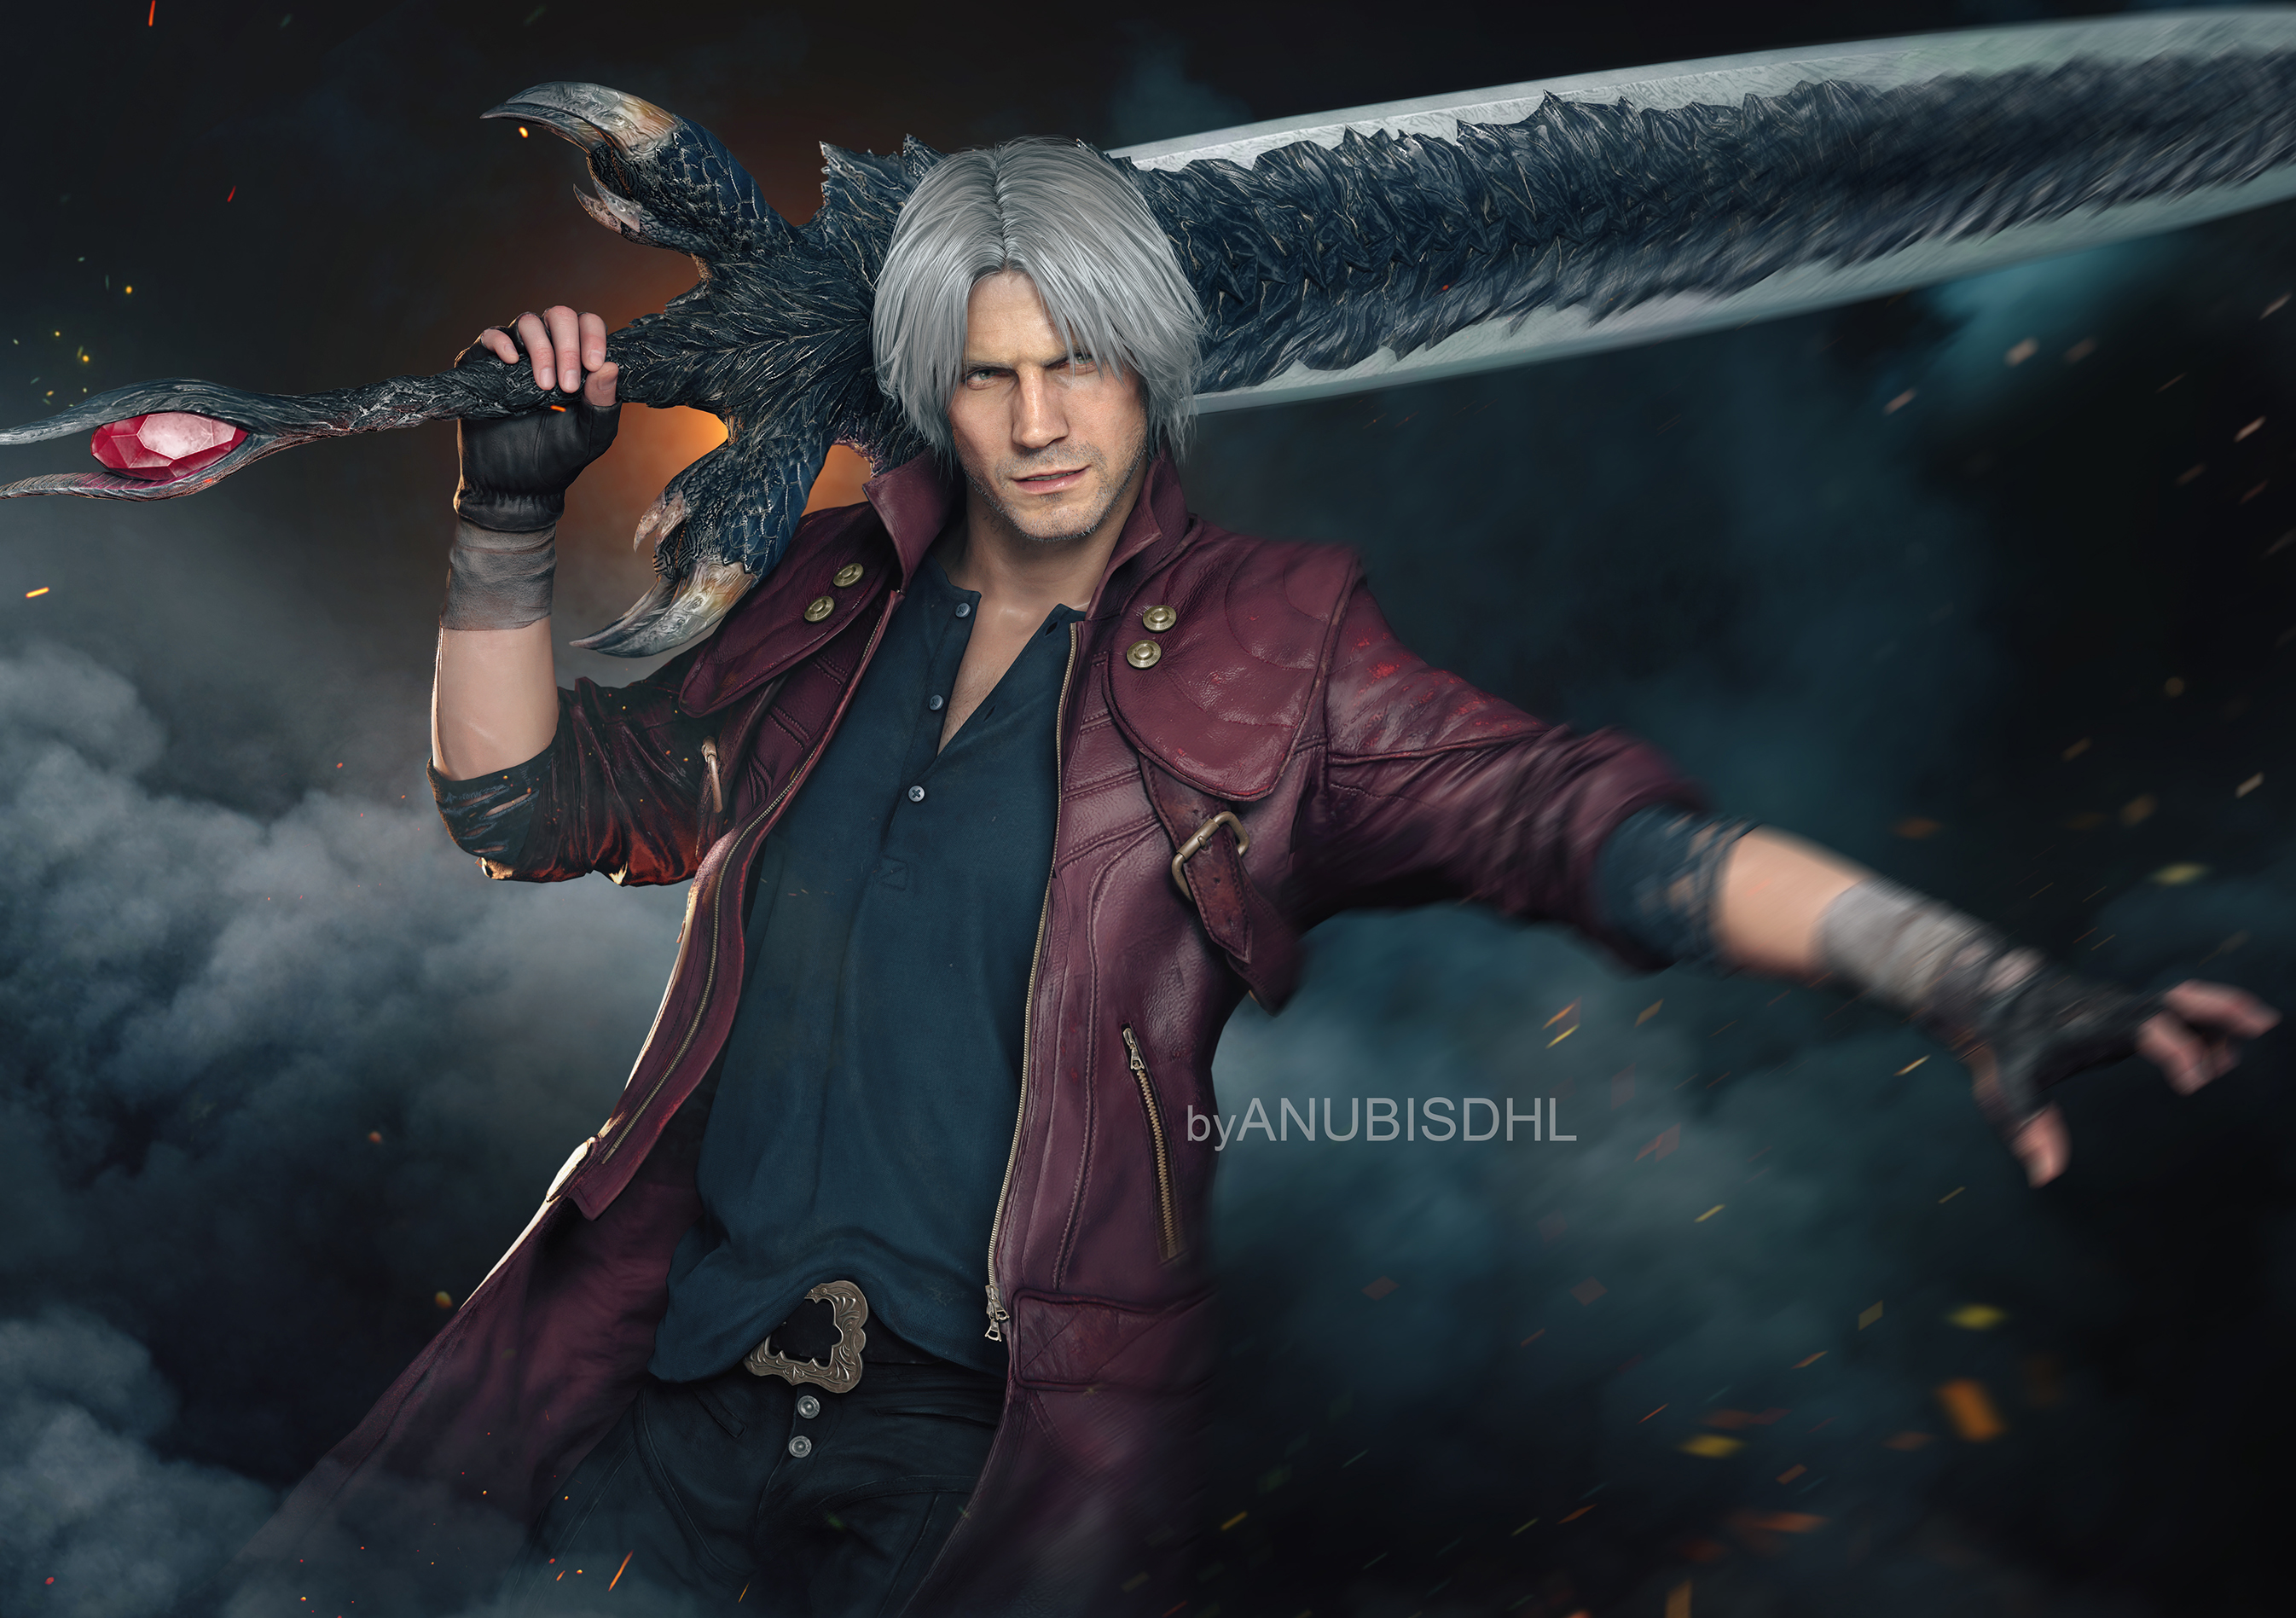 Dmc 5 русский. Данте Devil May Cry. Данте DMC 5. Devil May Cry 5 Dante. Данте Devil May Cry 3.